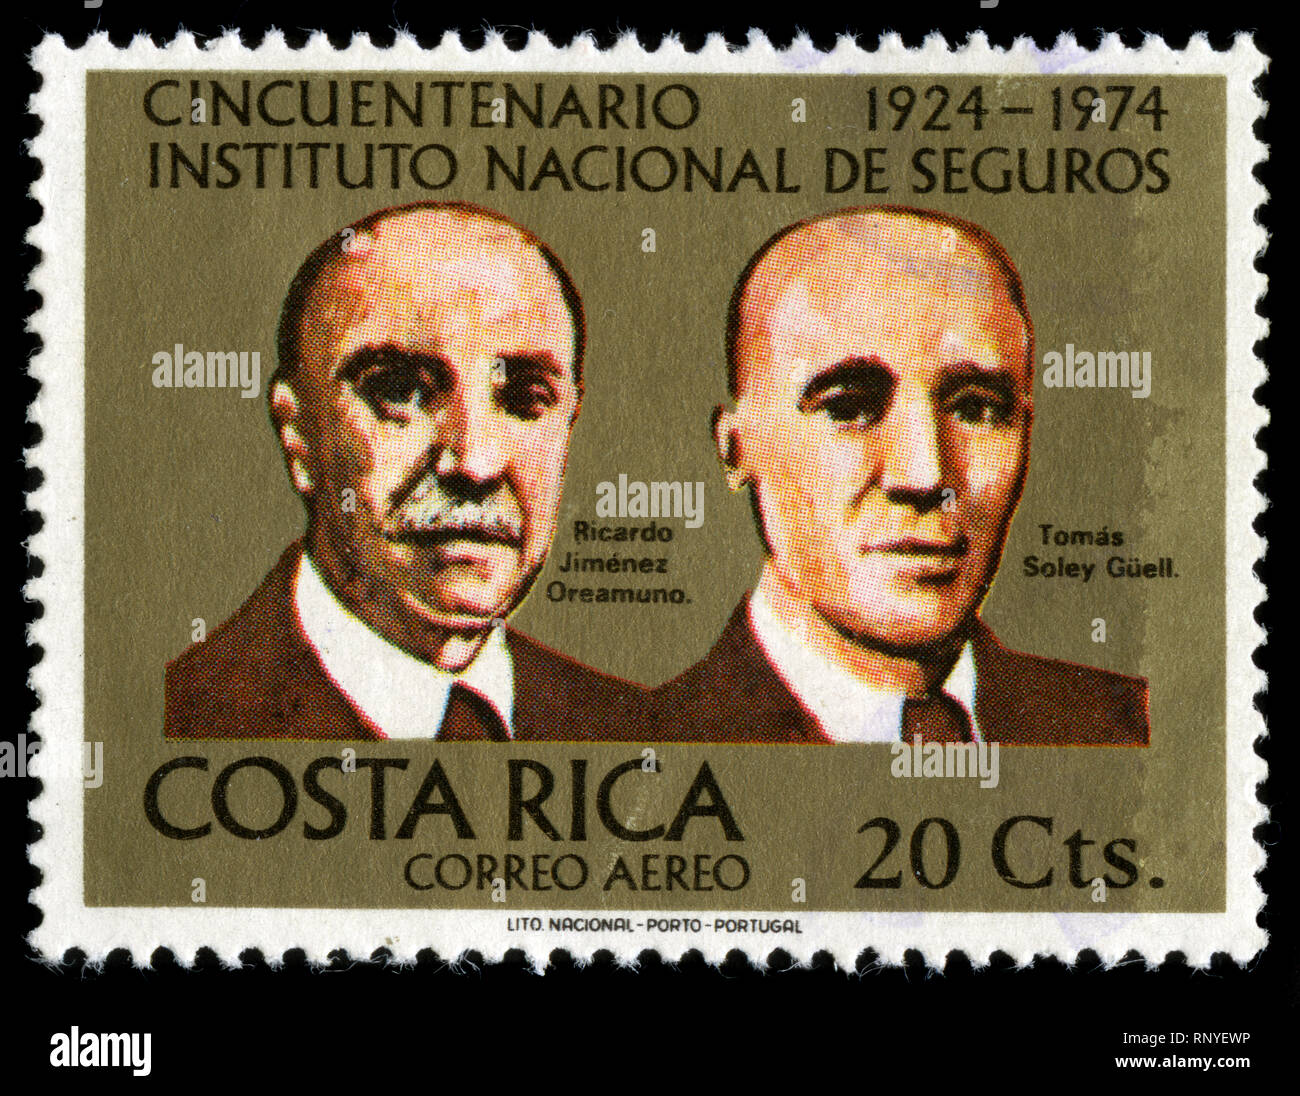 Postage stramp from Costa Rica in the Costa Rican Insurance Institute, 50th anniv. series issued in 1974 Stock Photo